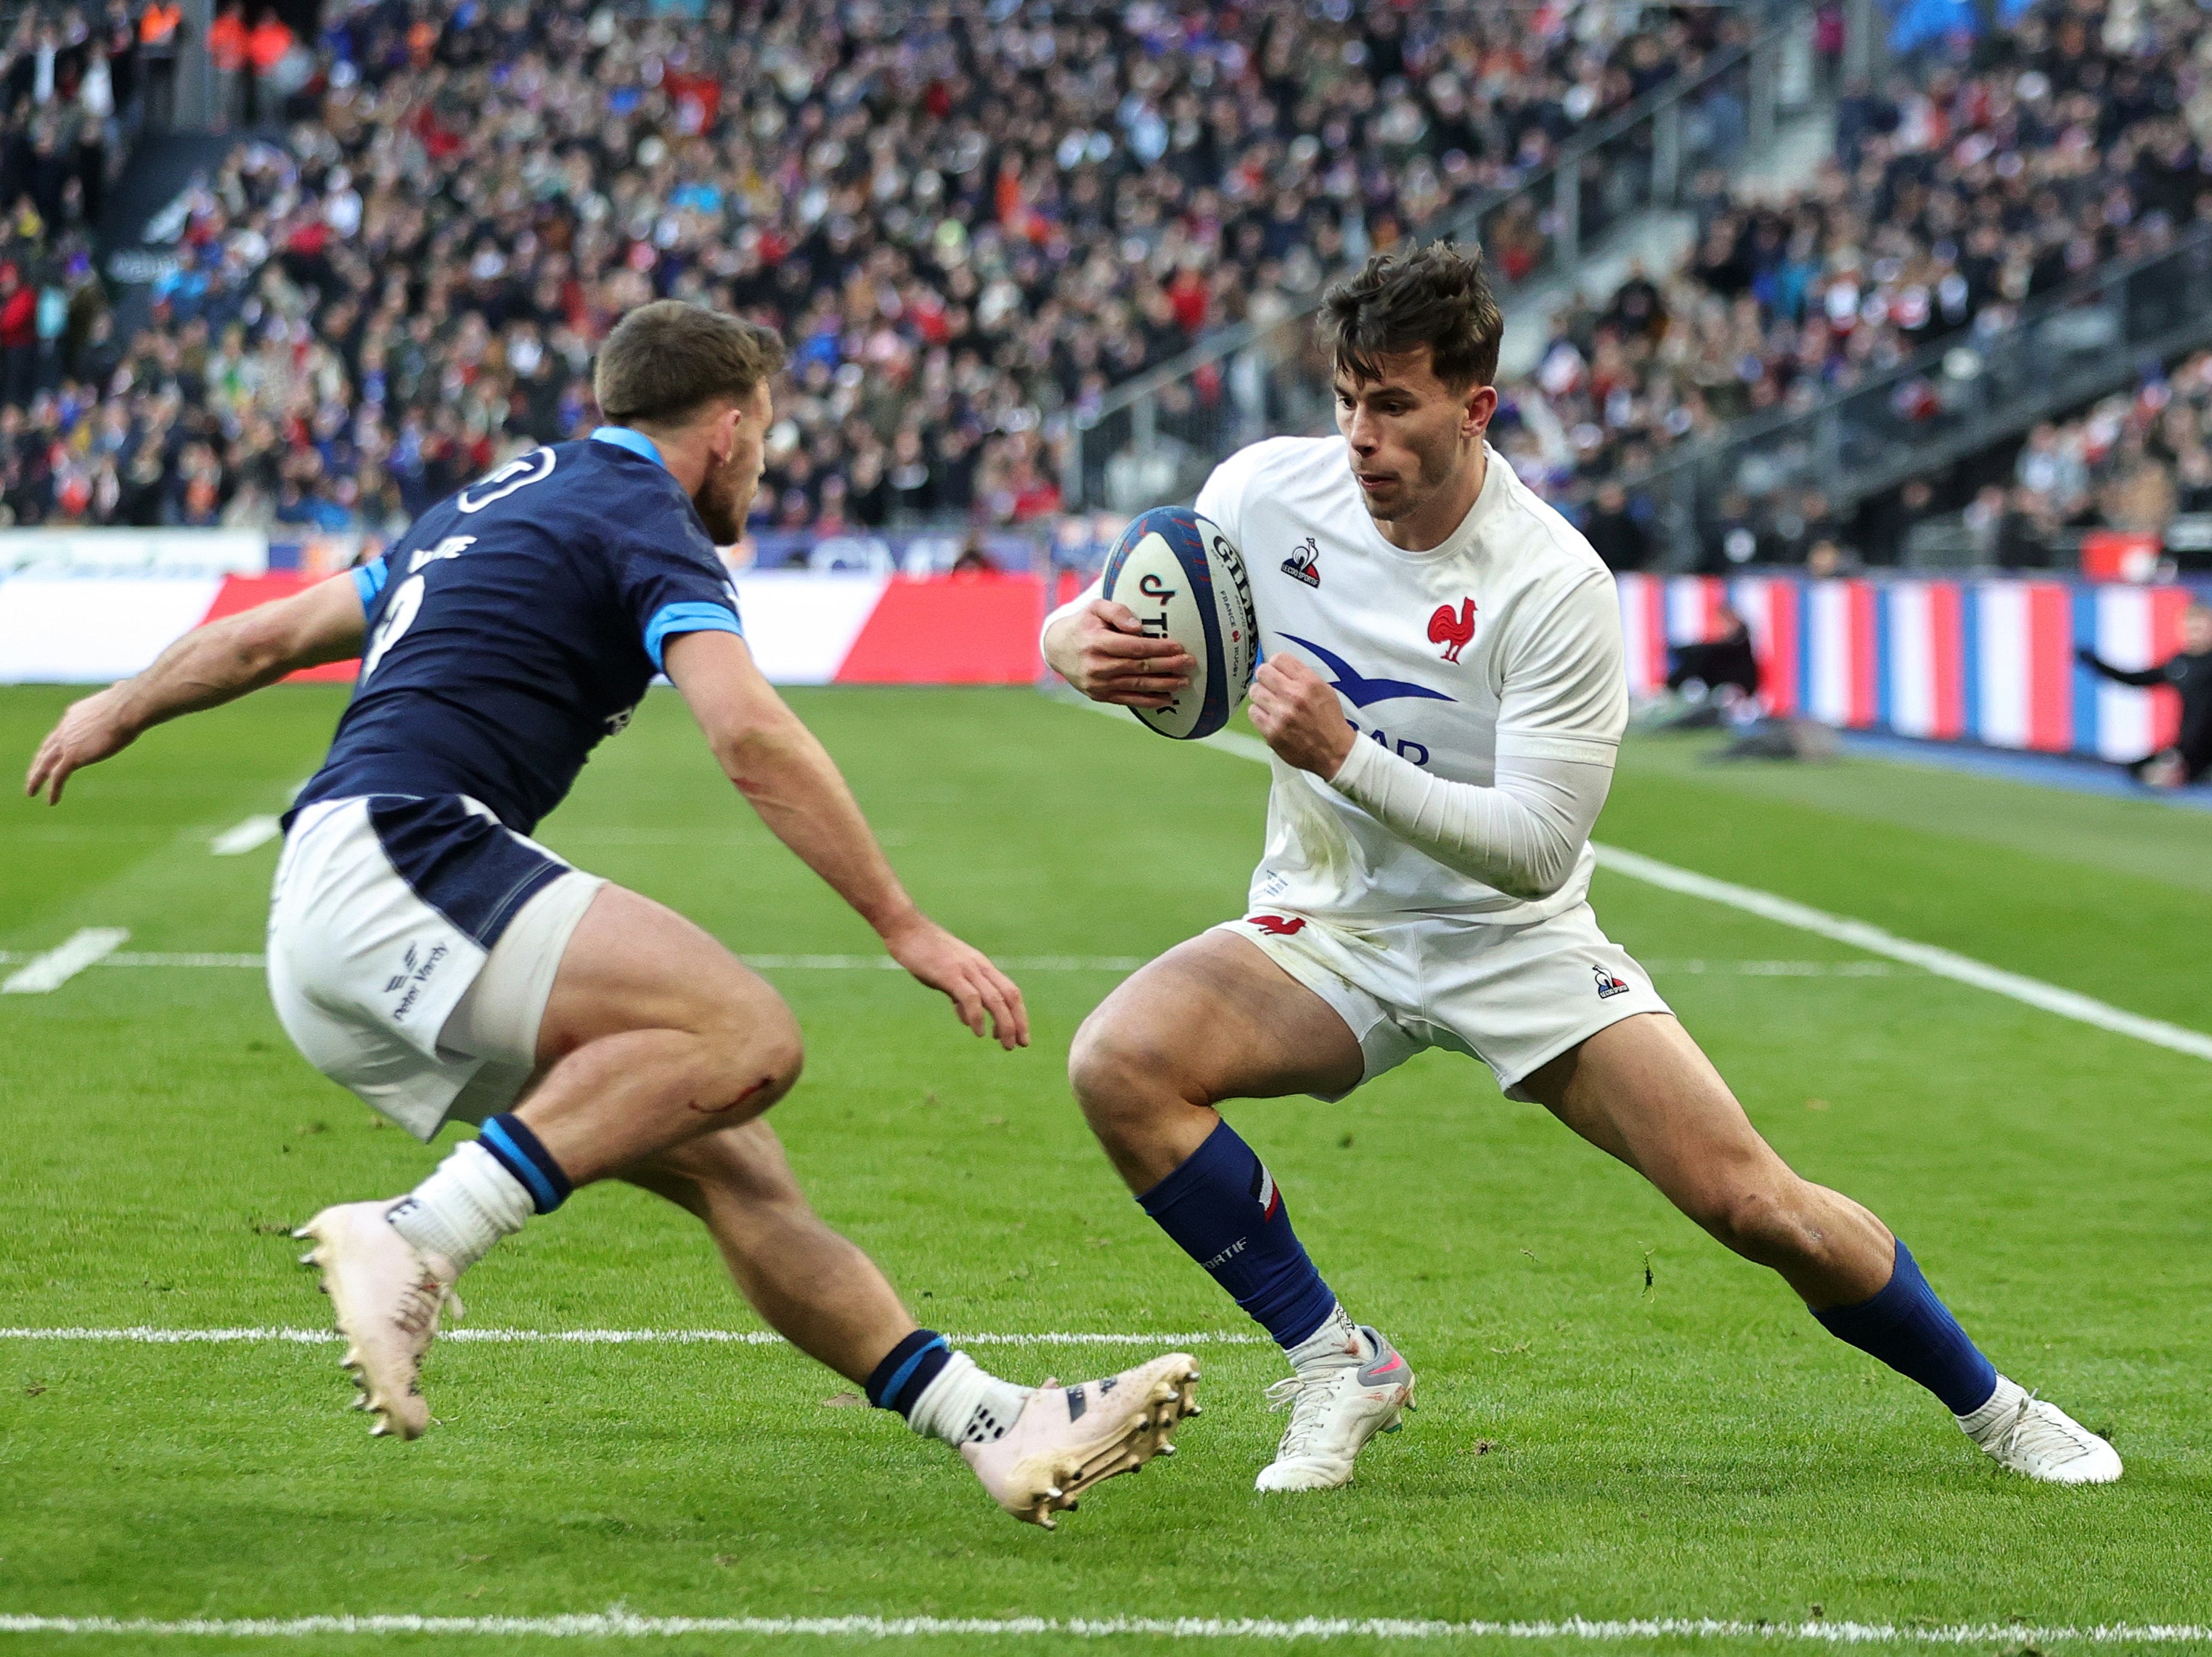 scotland france rugby live stream